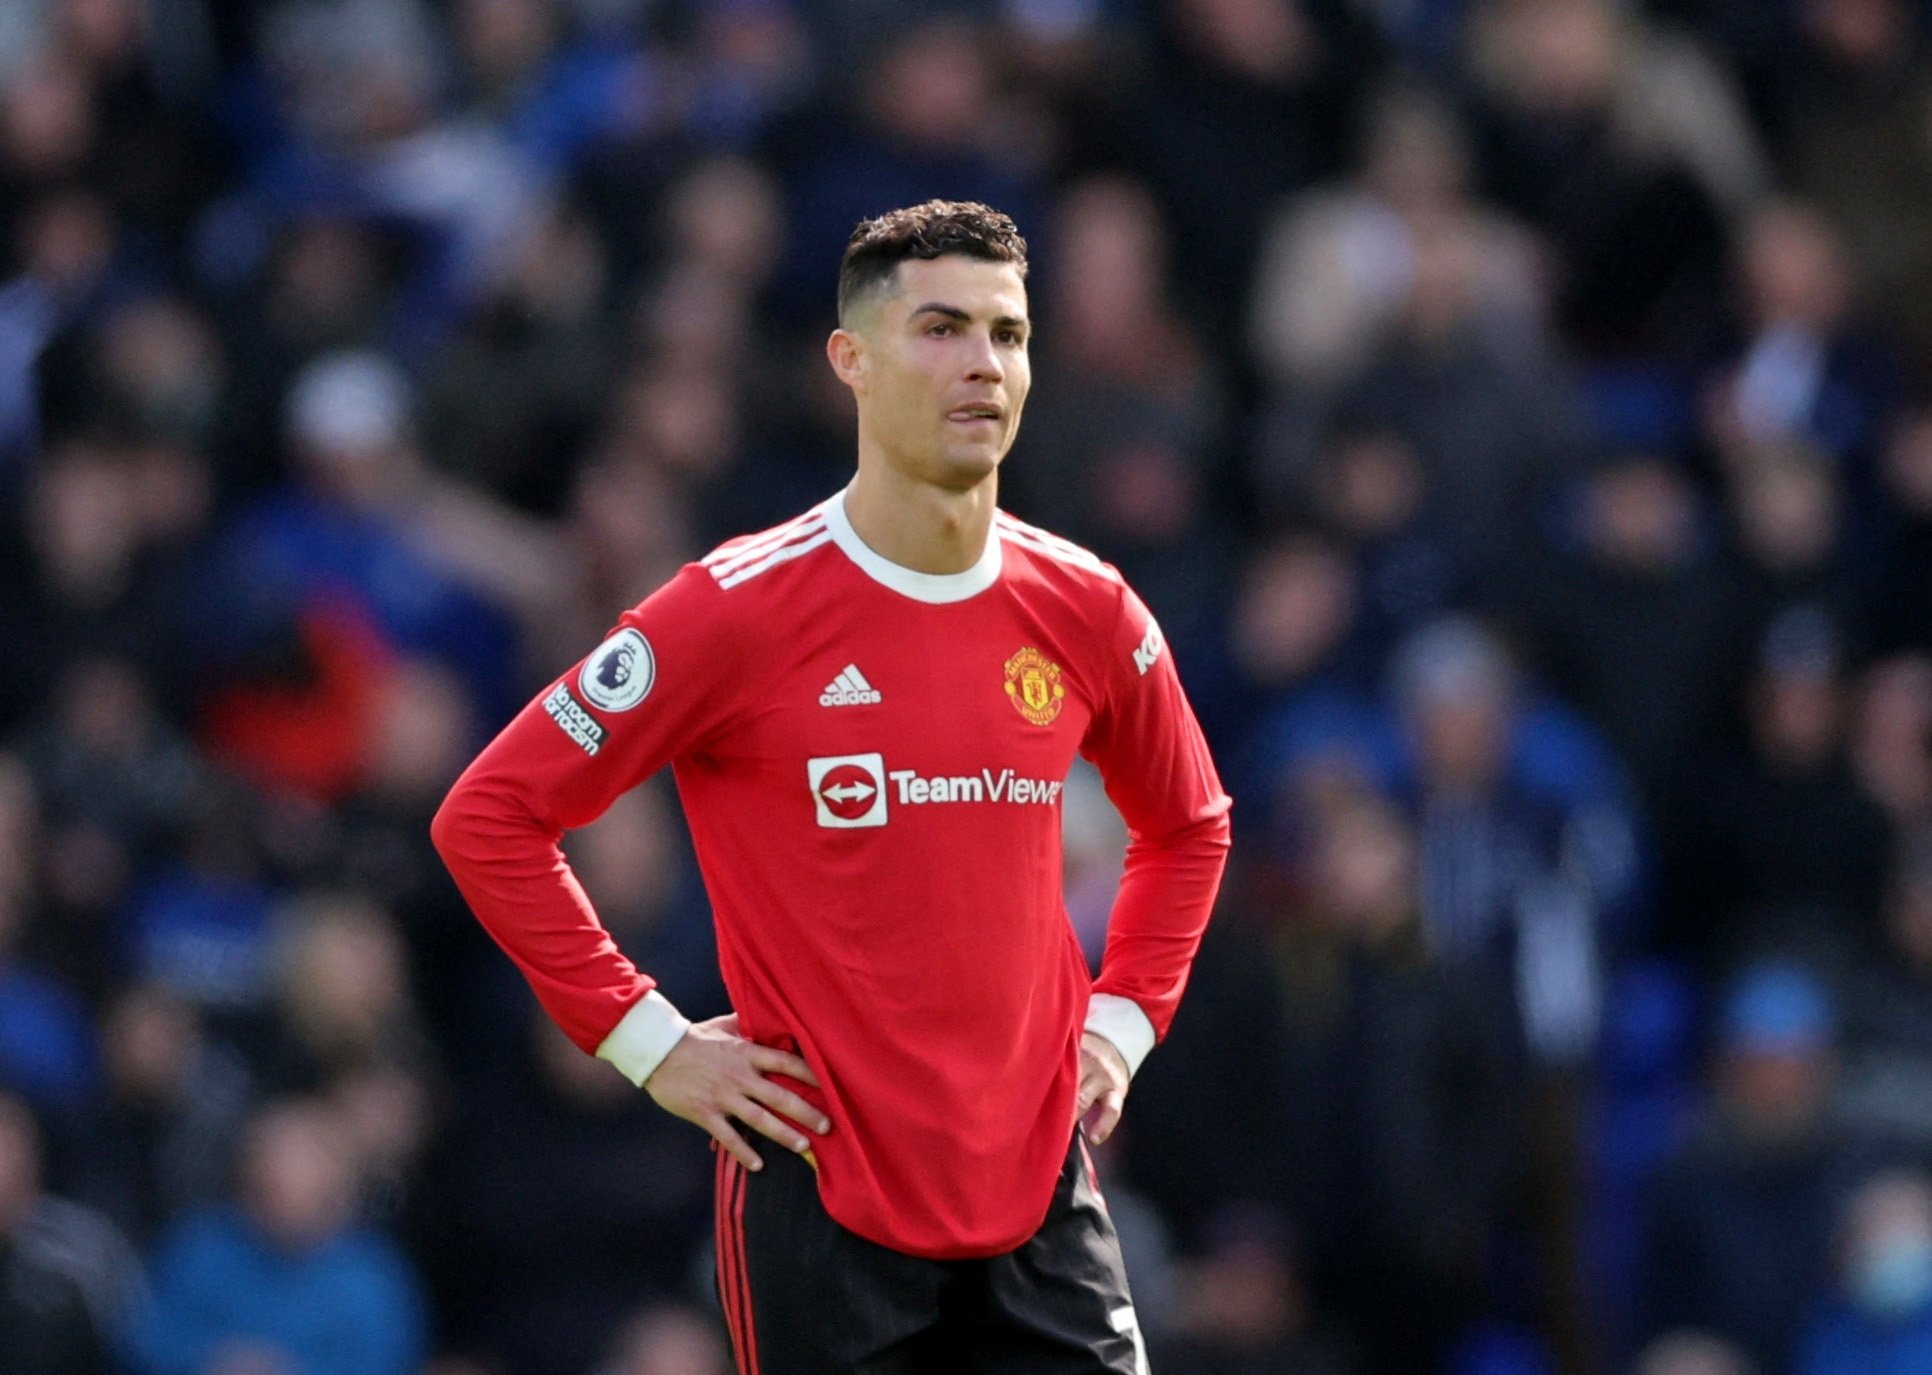 Police investigating claims that Cristiano Ronaldo SMASHED an Everton fan's phone